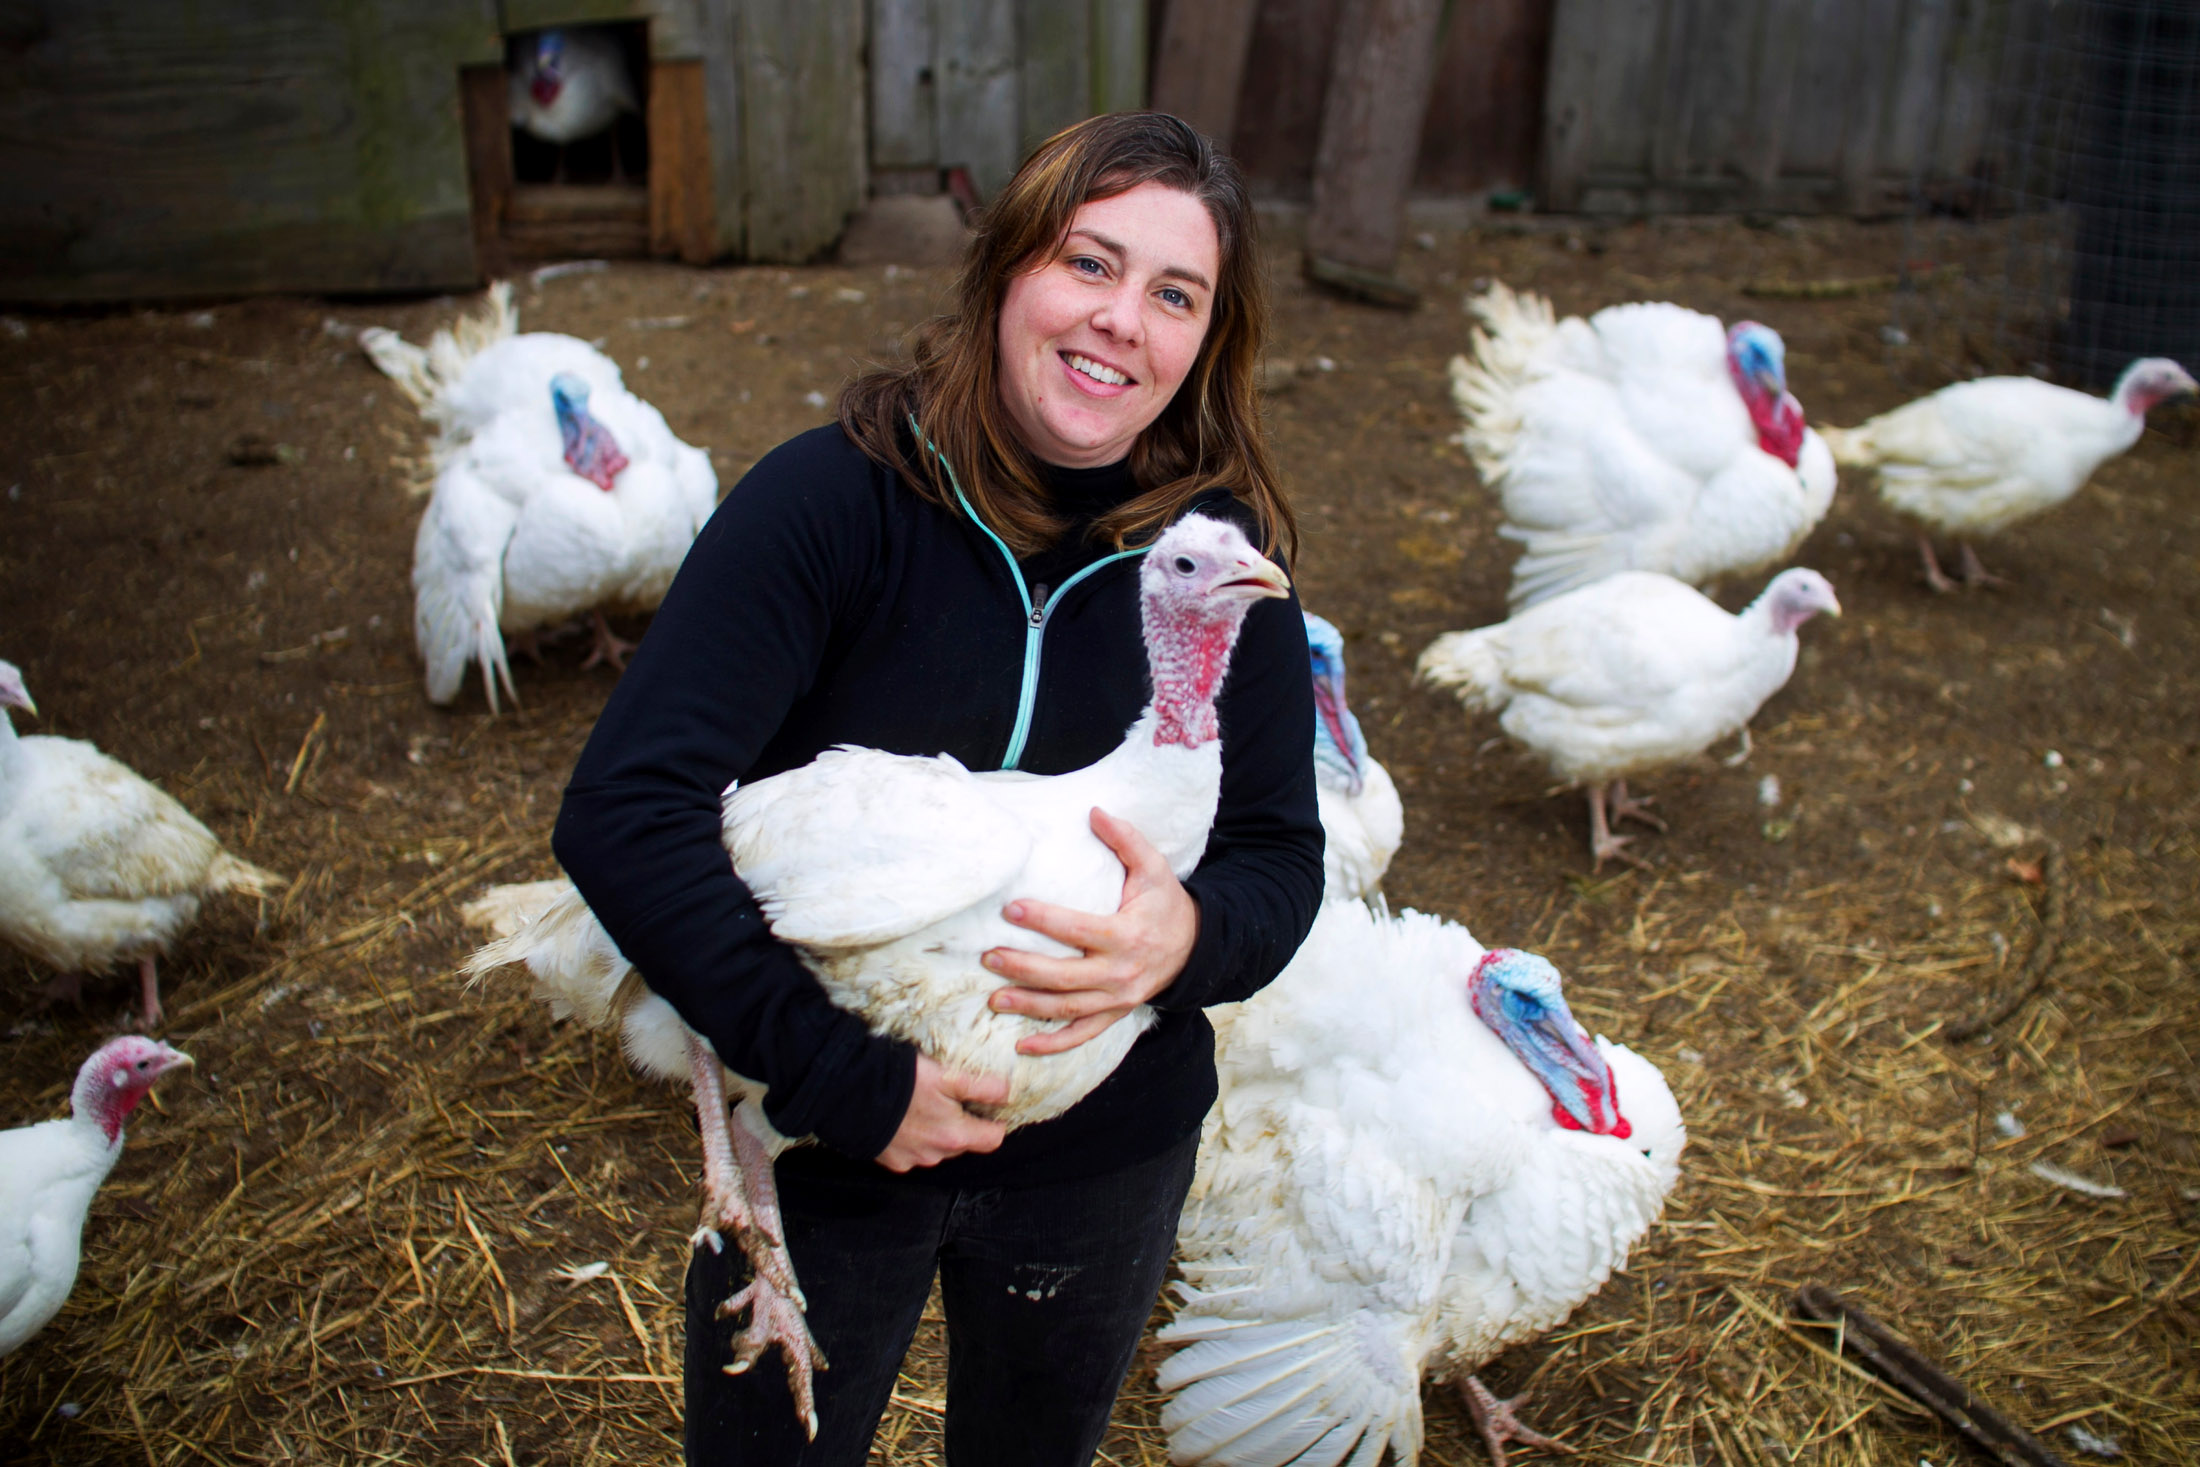  Kate Stillman, owner of Stillman Quality Meats, poses for a photo while holding a Broad Breasted White Turkey hen while standing inside a pen among the turkeys raised on her farm in Hardwick, Massachusetts on November 19, 2015. 

 